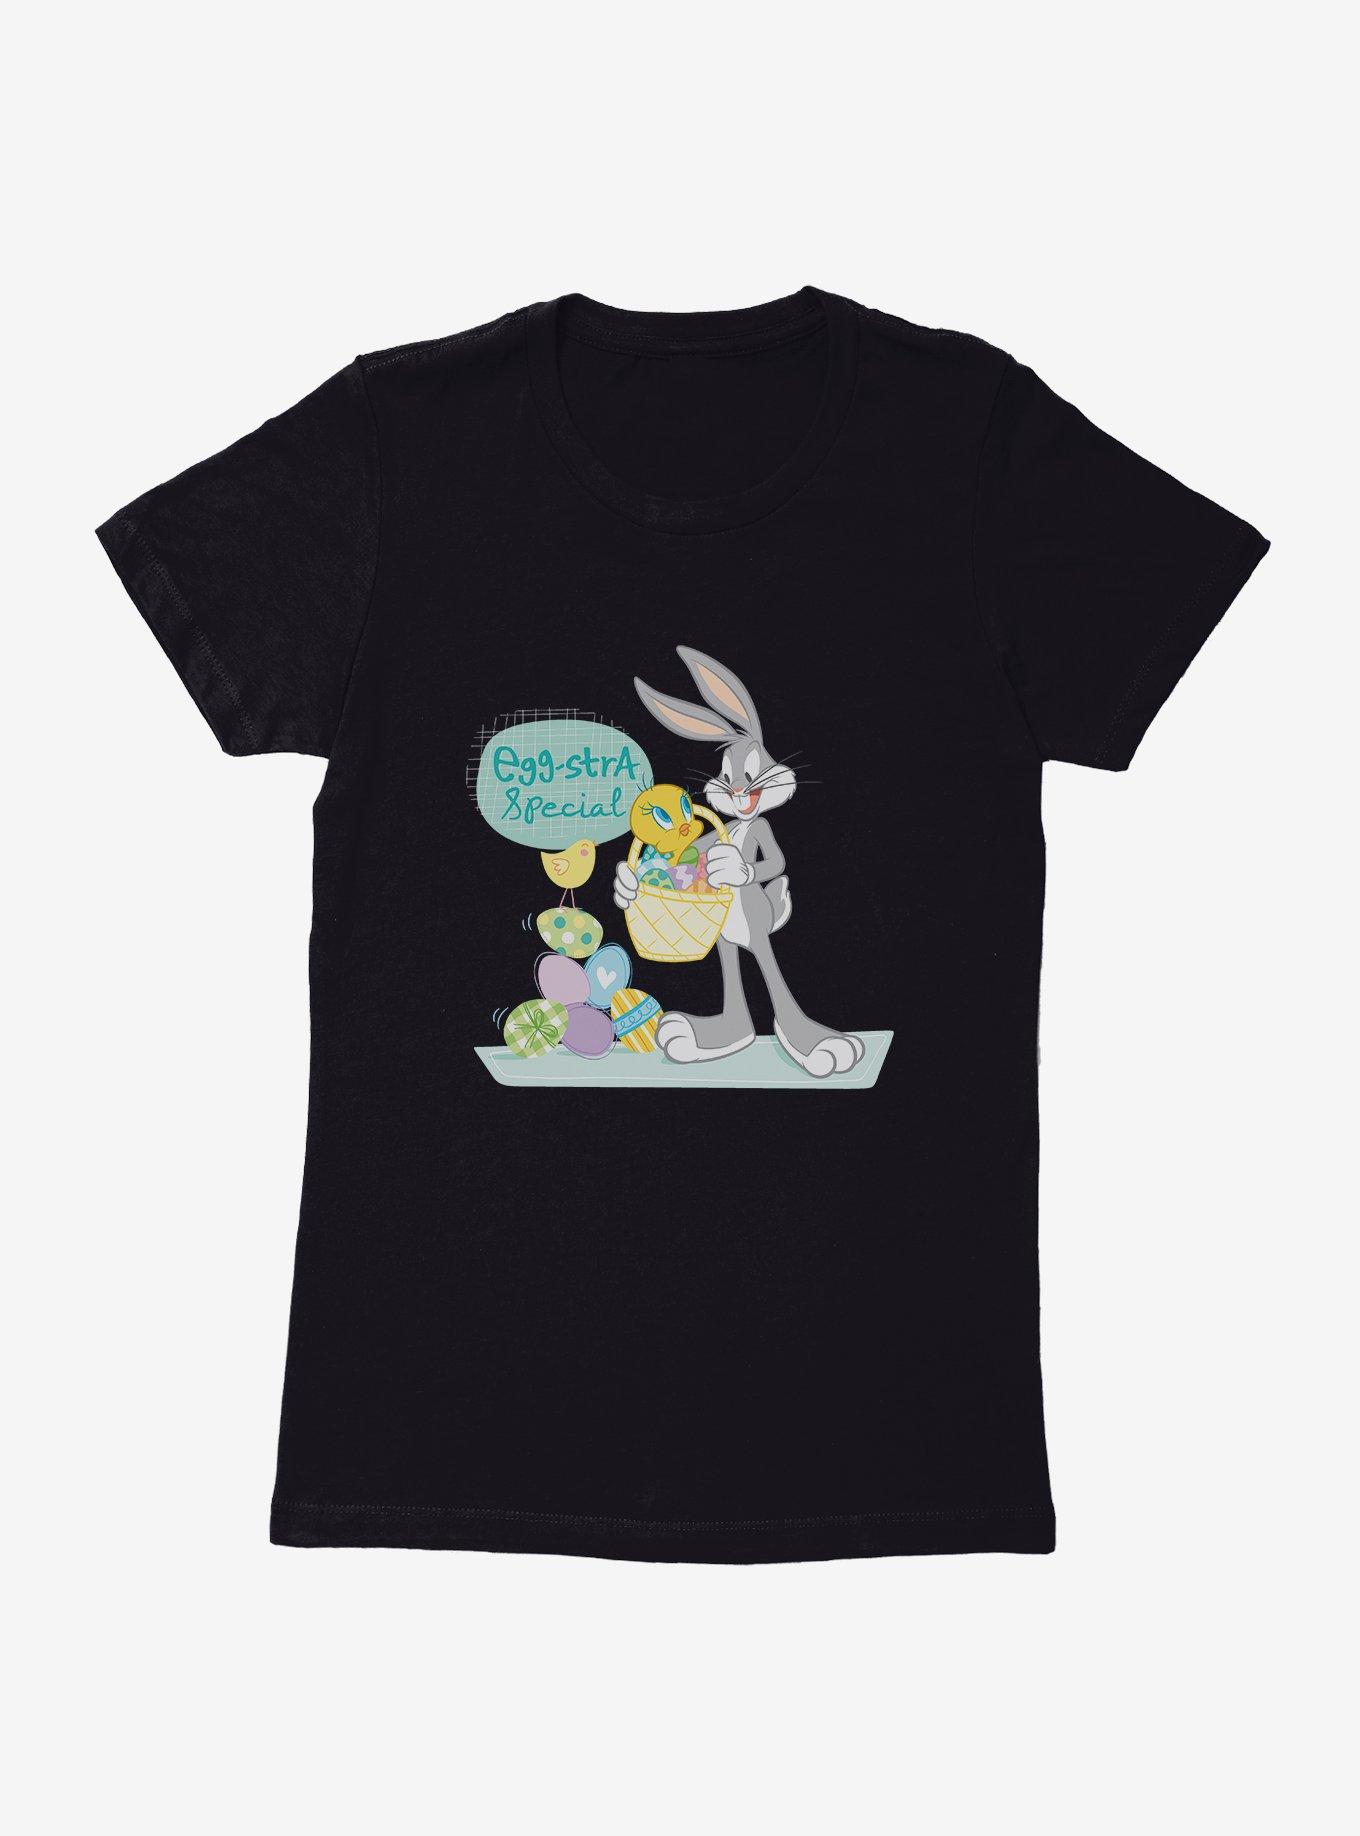 Looney Tunes Easter Bugs Bunny Tweety Egg-Stra Special! Womens T-Shirt, BLACK, hi-res